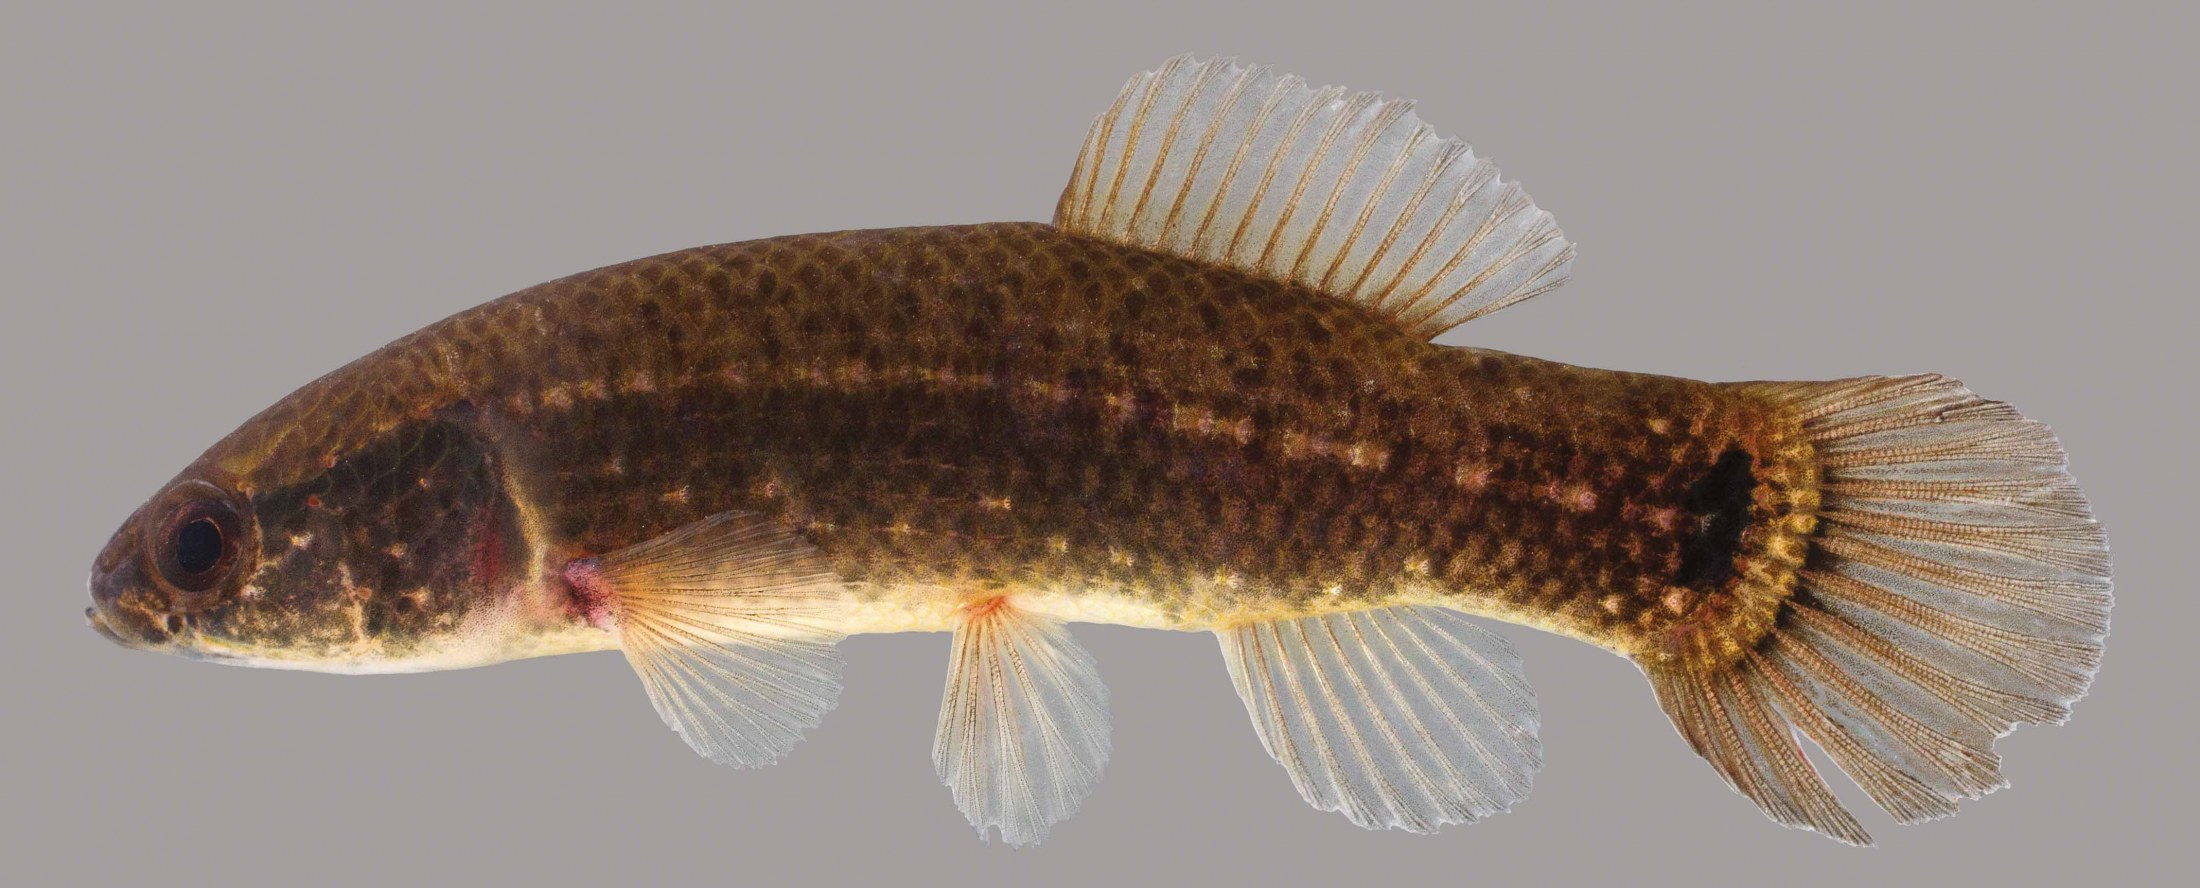 Eastern Mudminnow – Discover Fishes